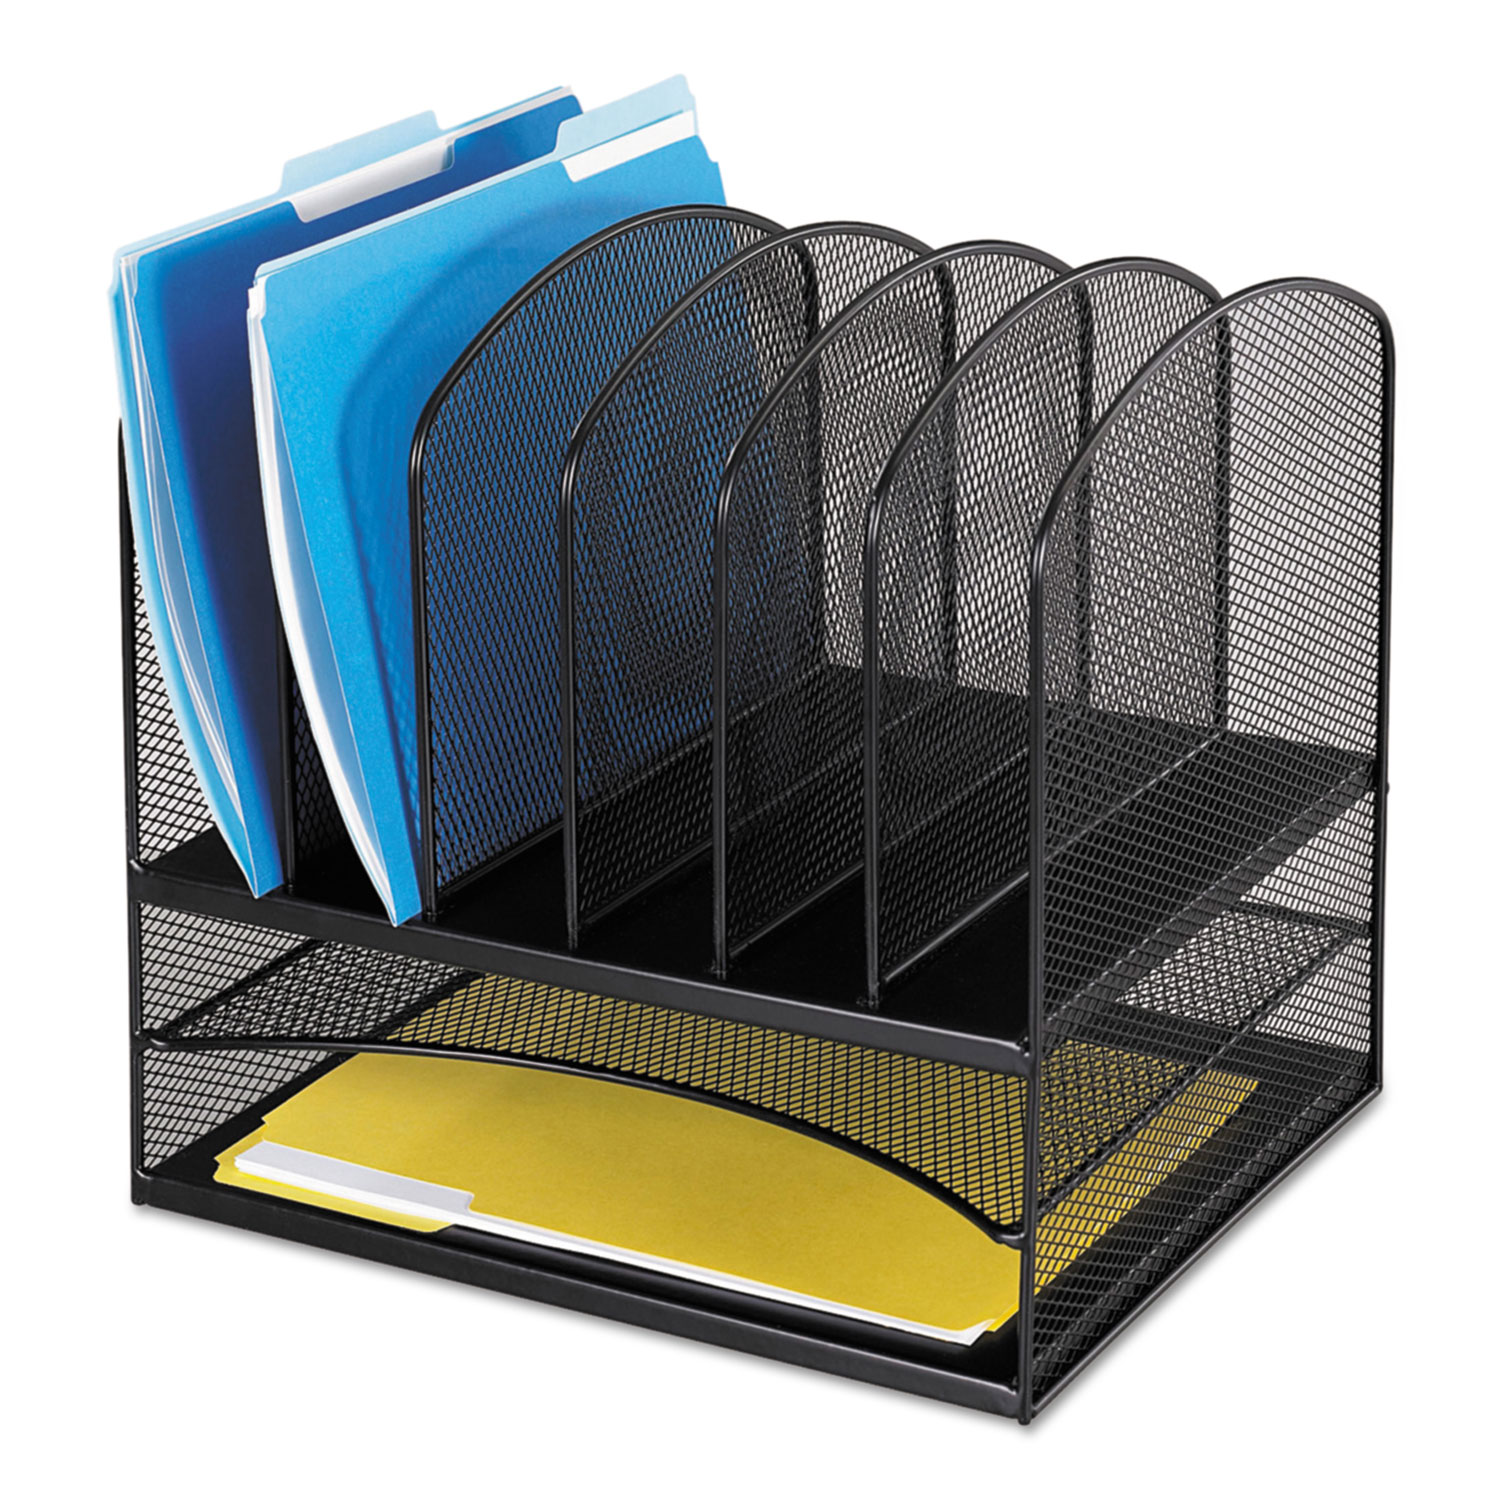  Safco 3255BL Onyx Mesh Desk Organizer with Two Horizontal and Six Upright Sections, Letter Size Files, 13.25 x 11.5 x 13, Black (SAF3255BL) 